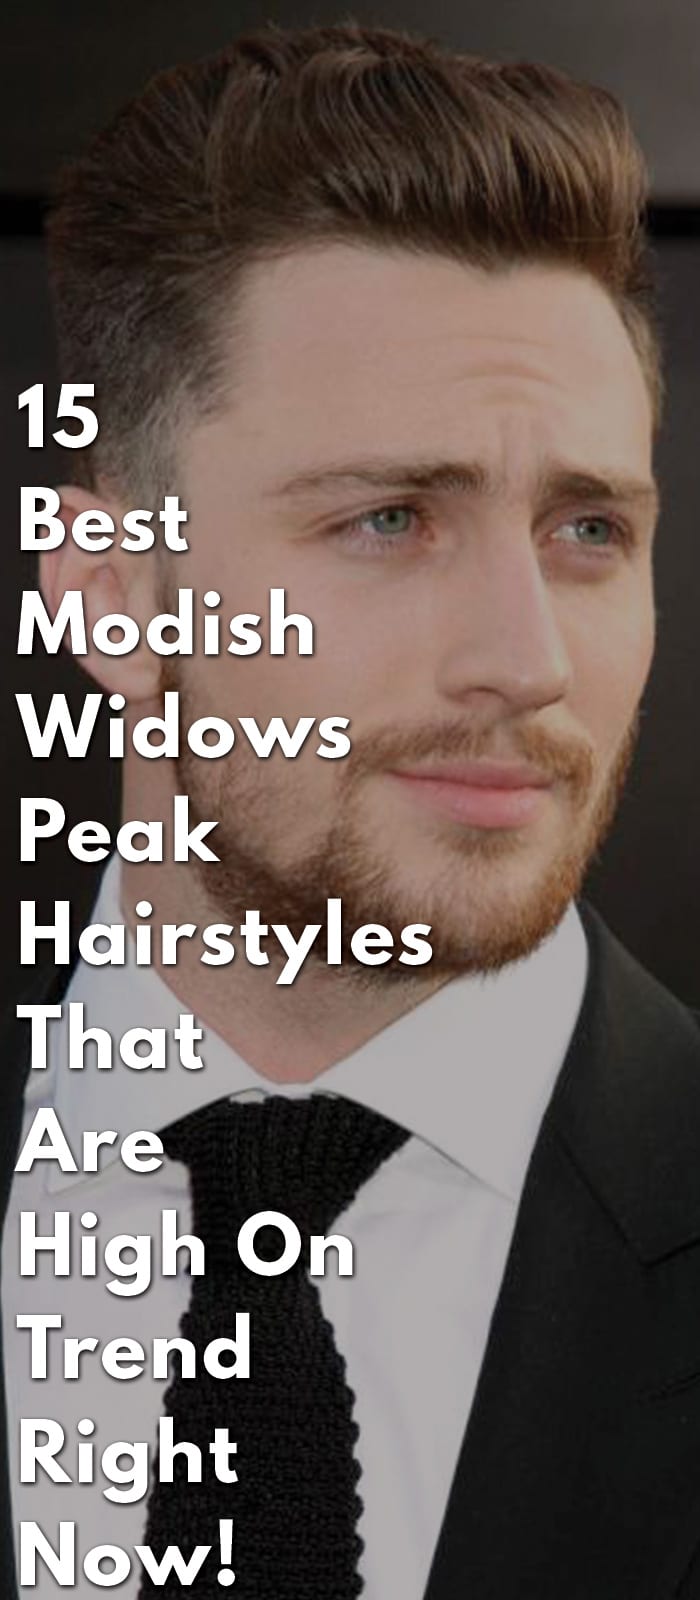 15-Best-Modish-Widows-Peak-Hairstyles-That-Are-High-On-Trend-Right-Now!